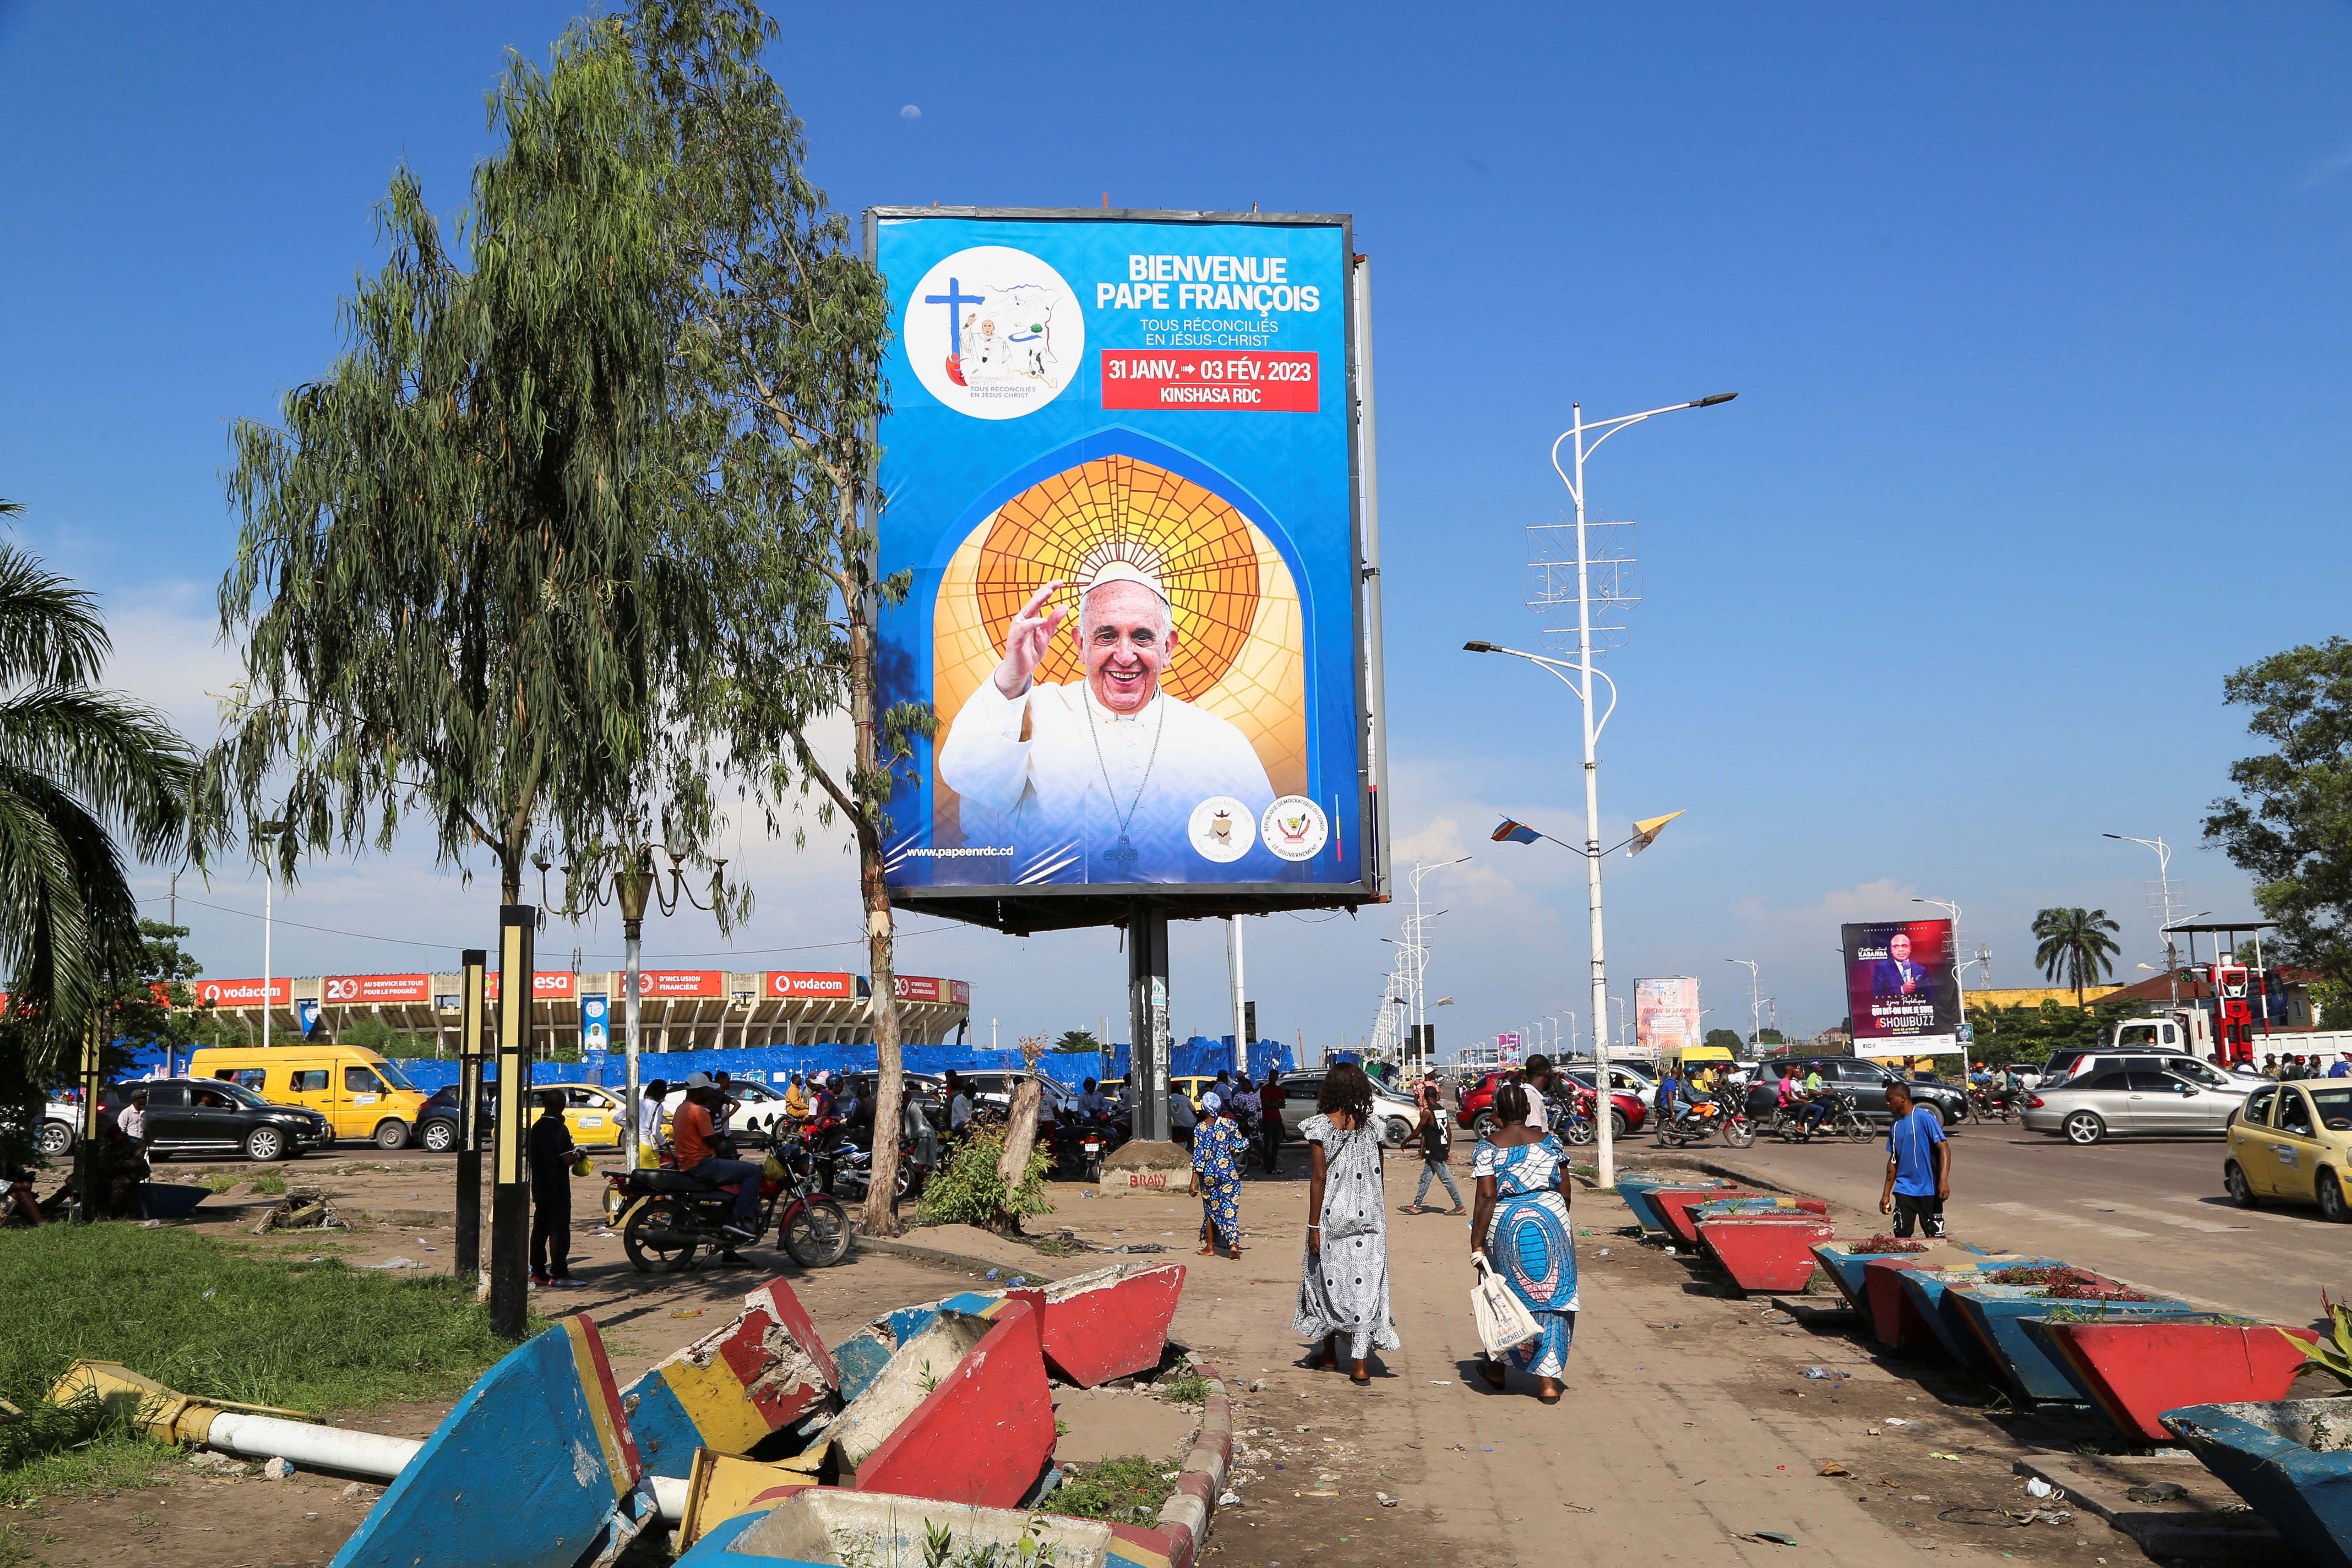 Congo's capital gets ready for pope's visit